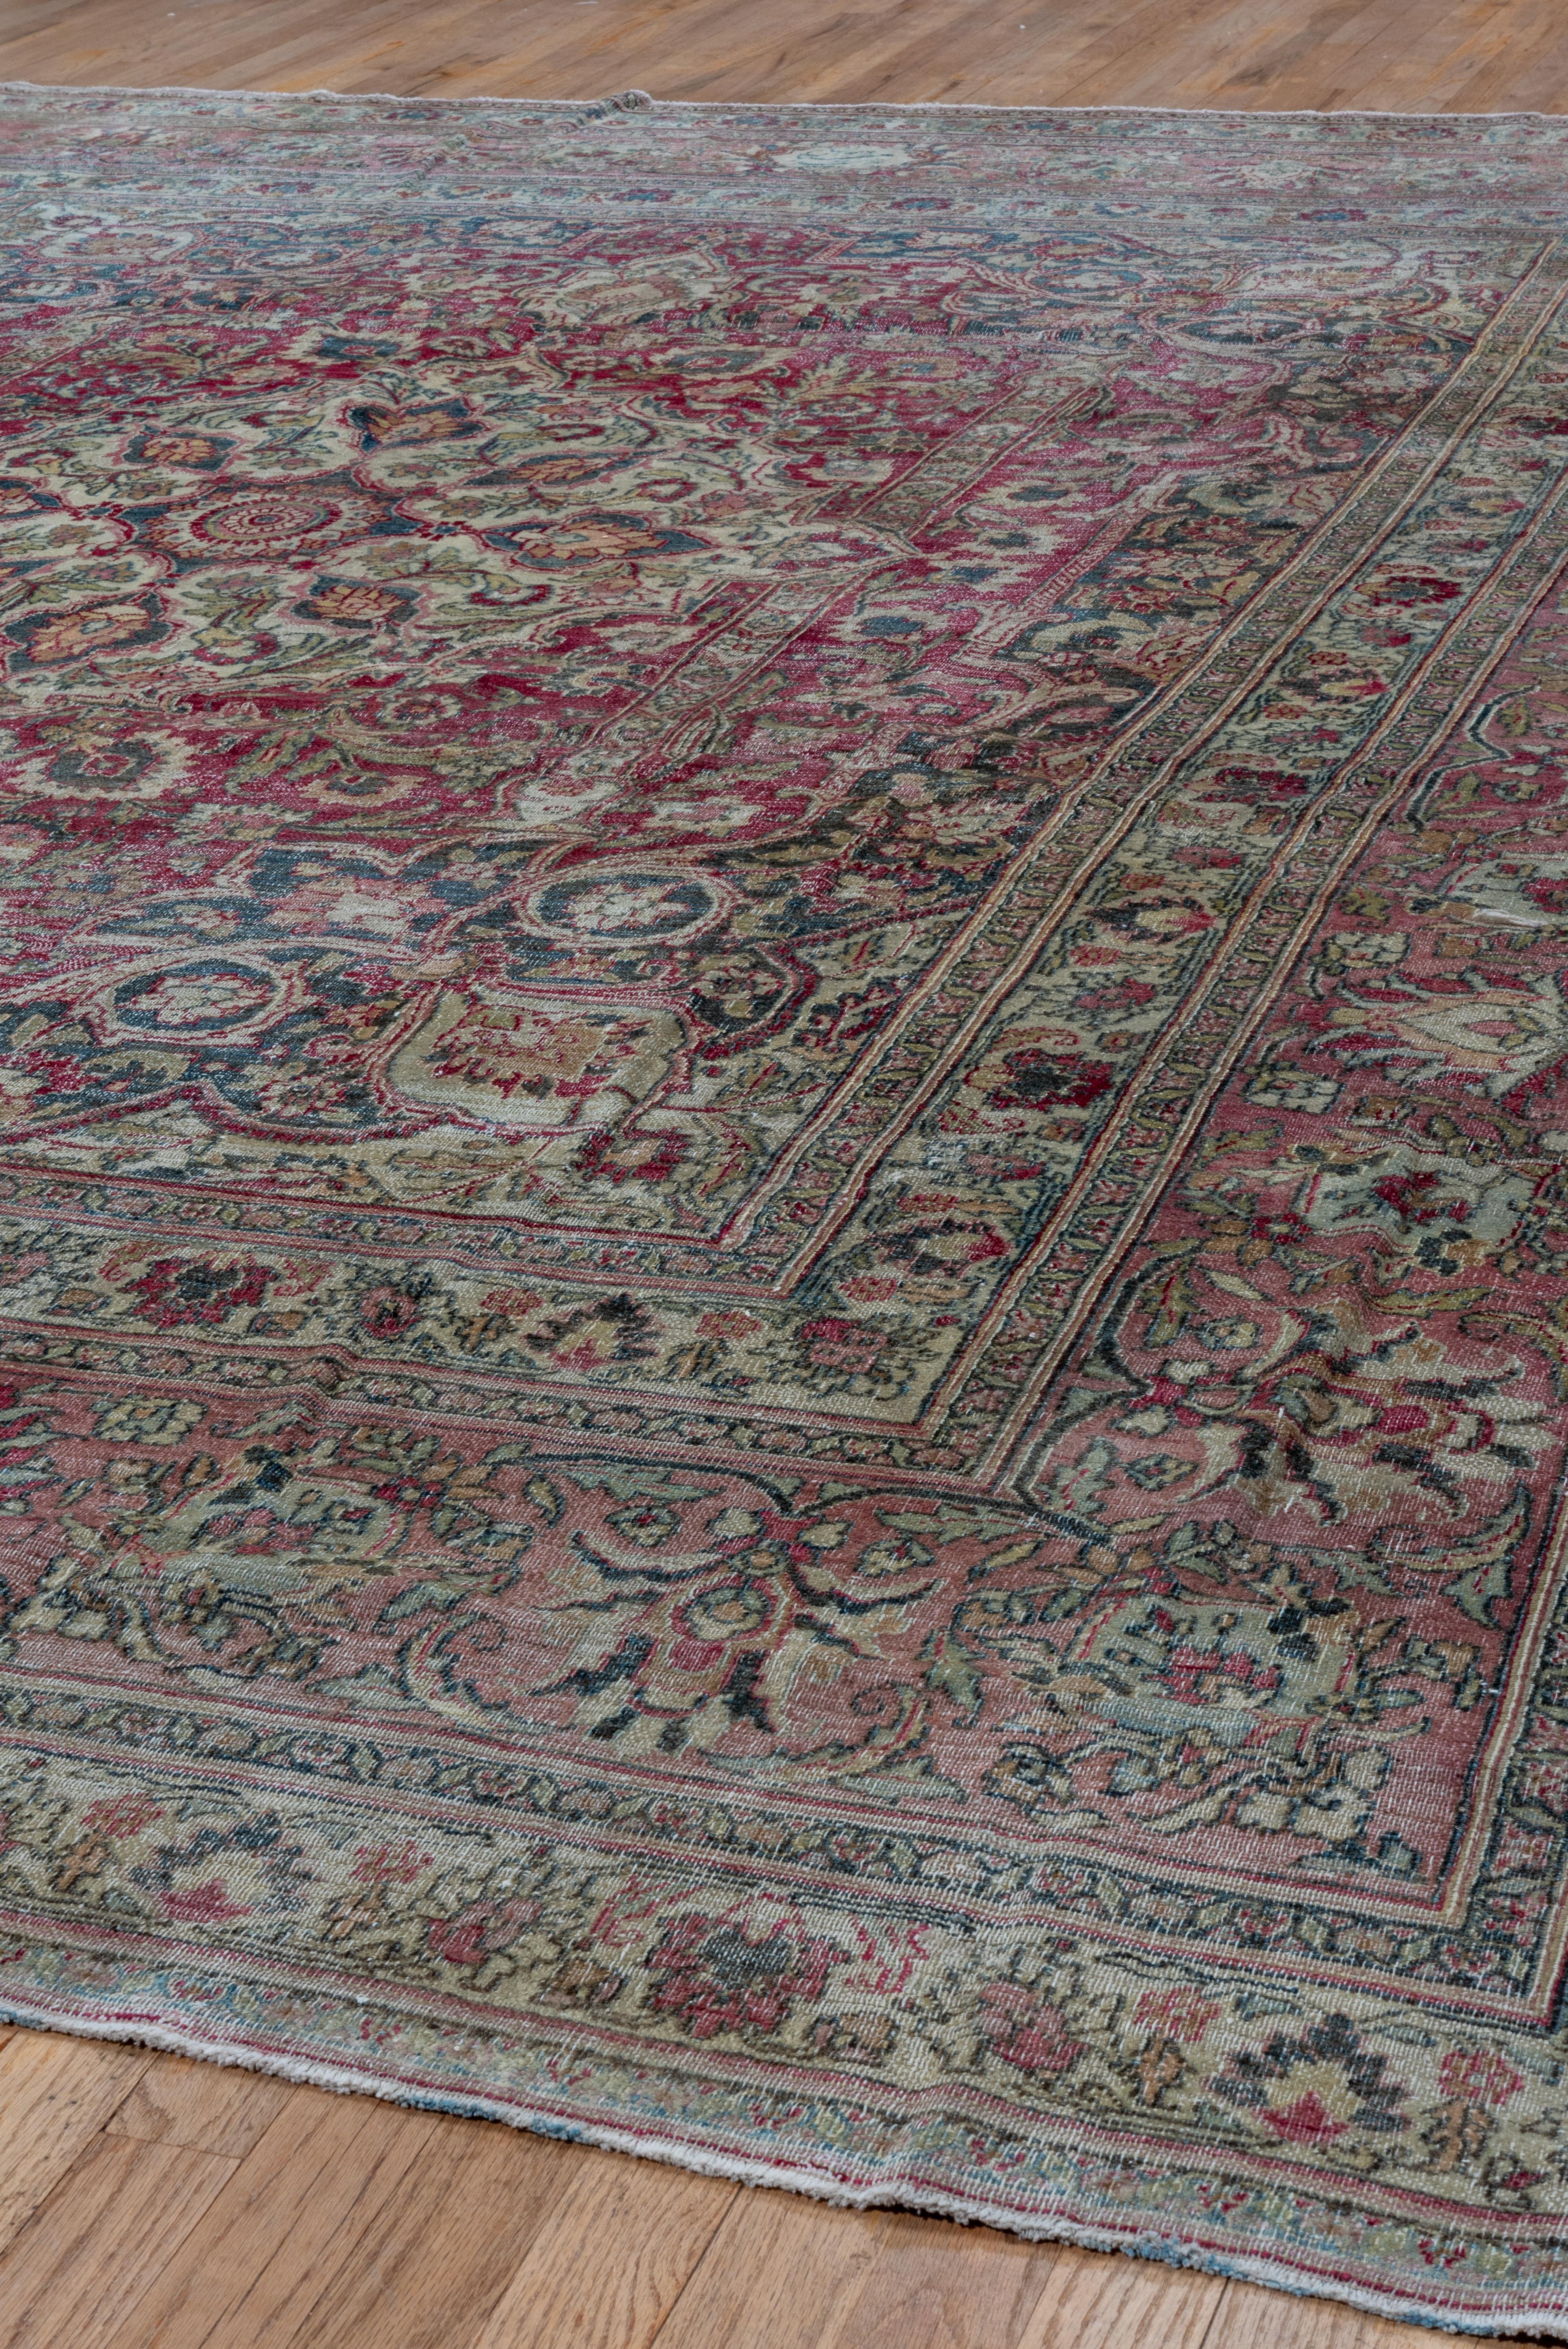 Hand-Knotted Antique Colorful Persian Khorassan Rug, Red Pink Green and Ivory Tones For Sale